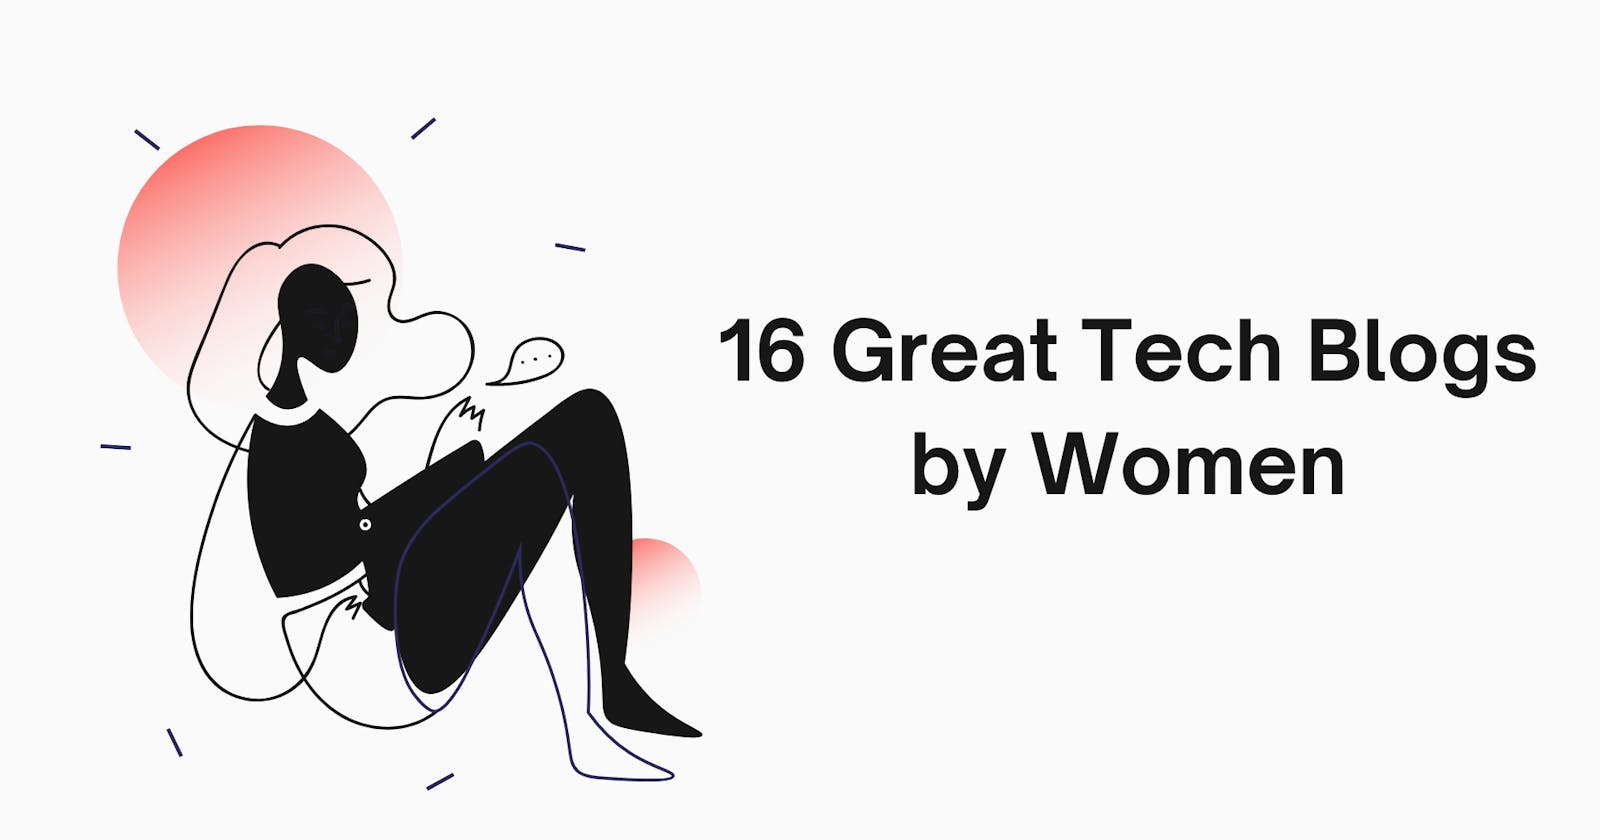 16 Great Tech Blogs by Women and Why You Should Read Them